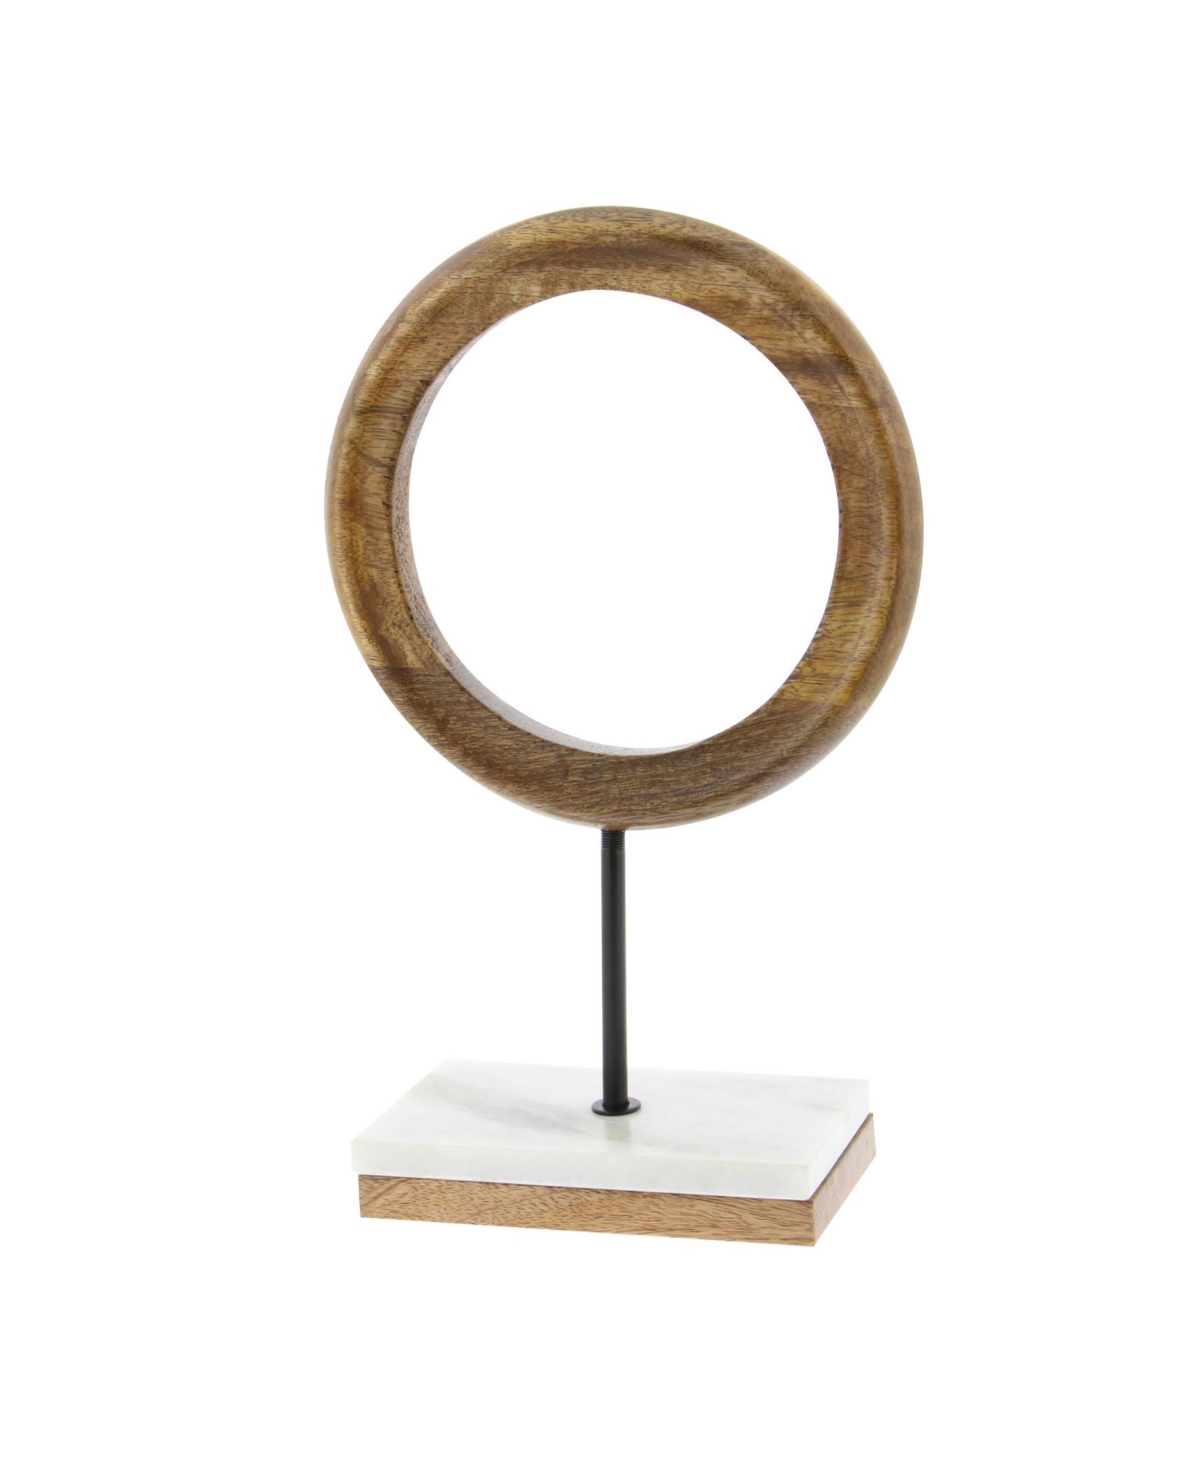 Rosemary Lane Mango Wood Abstract Sculpture, 14" X 9" In Brown